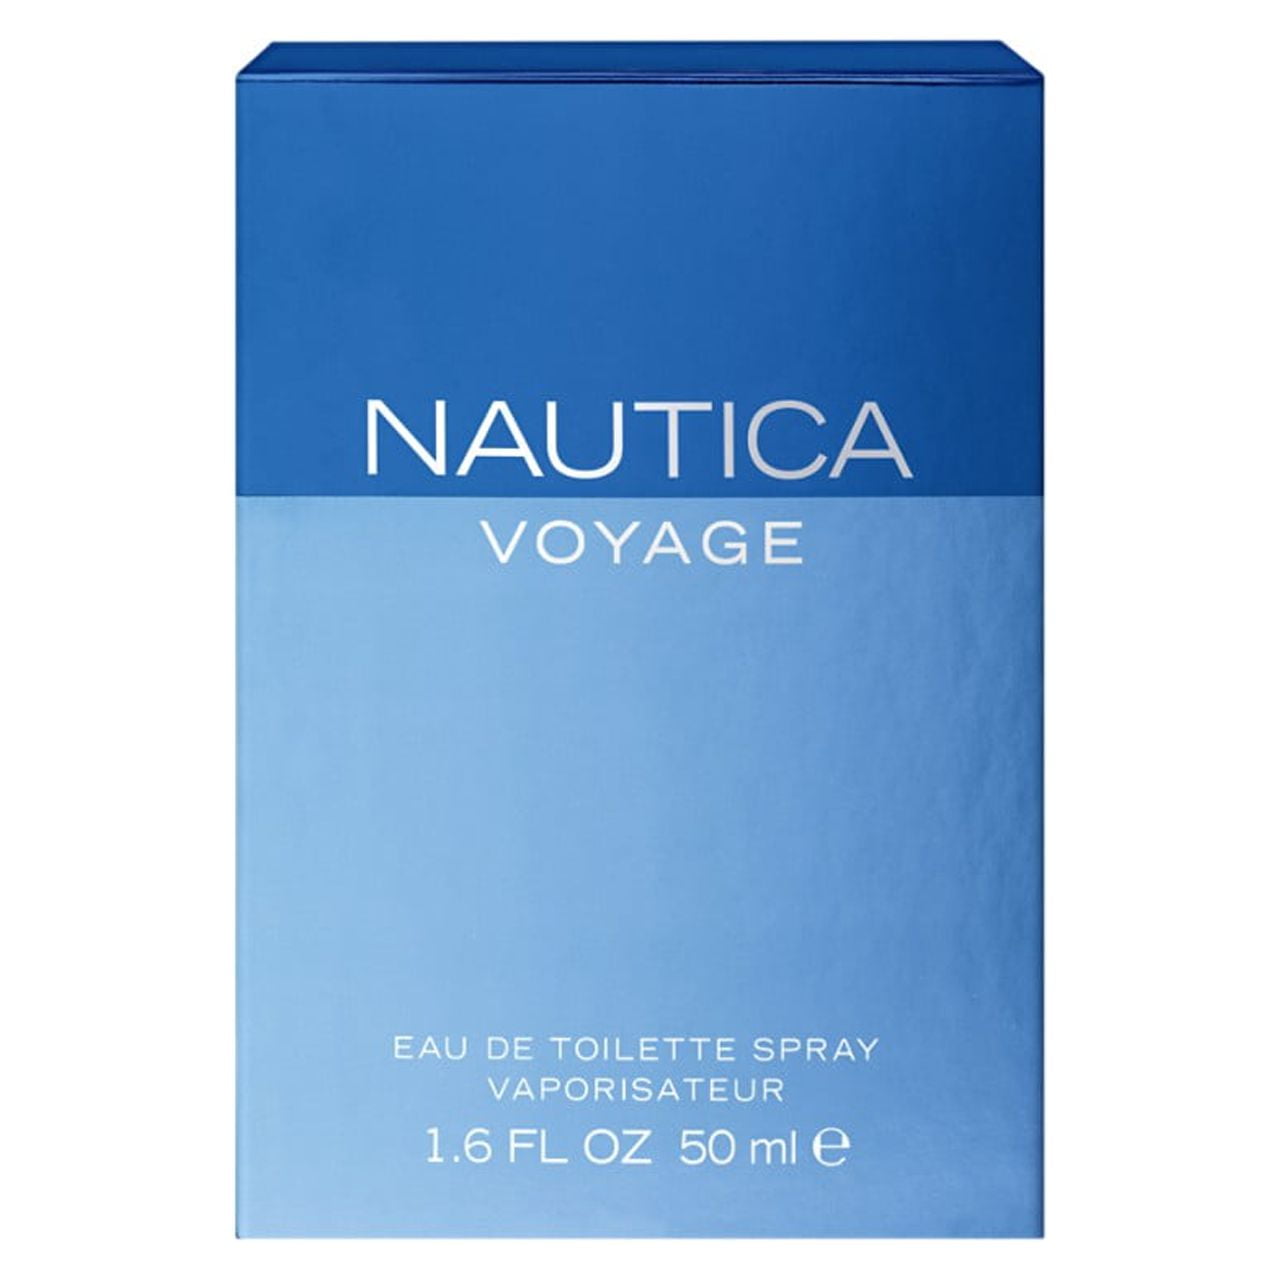 Nautica Perfume Brands in Kenya and Best Prices